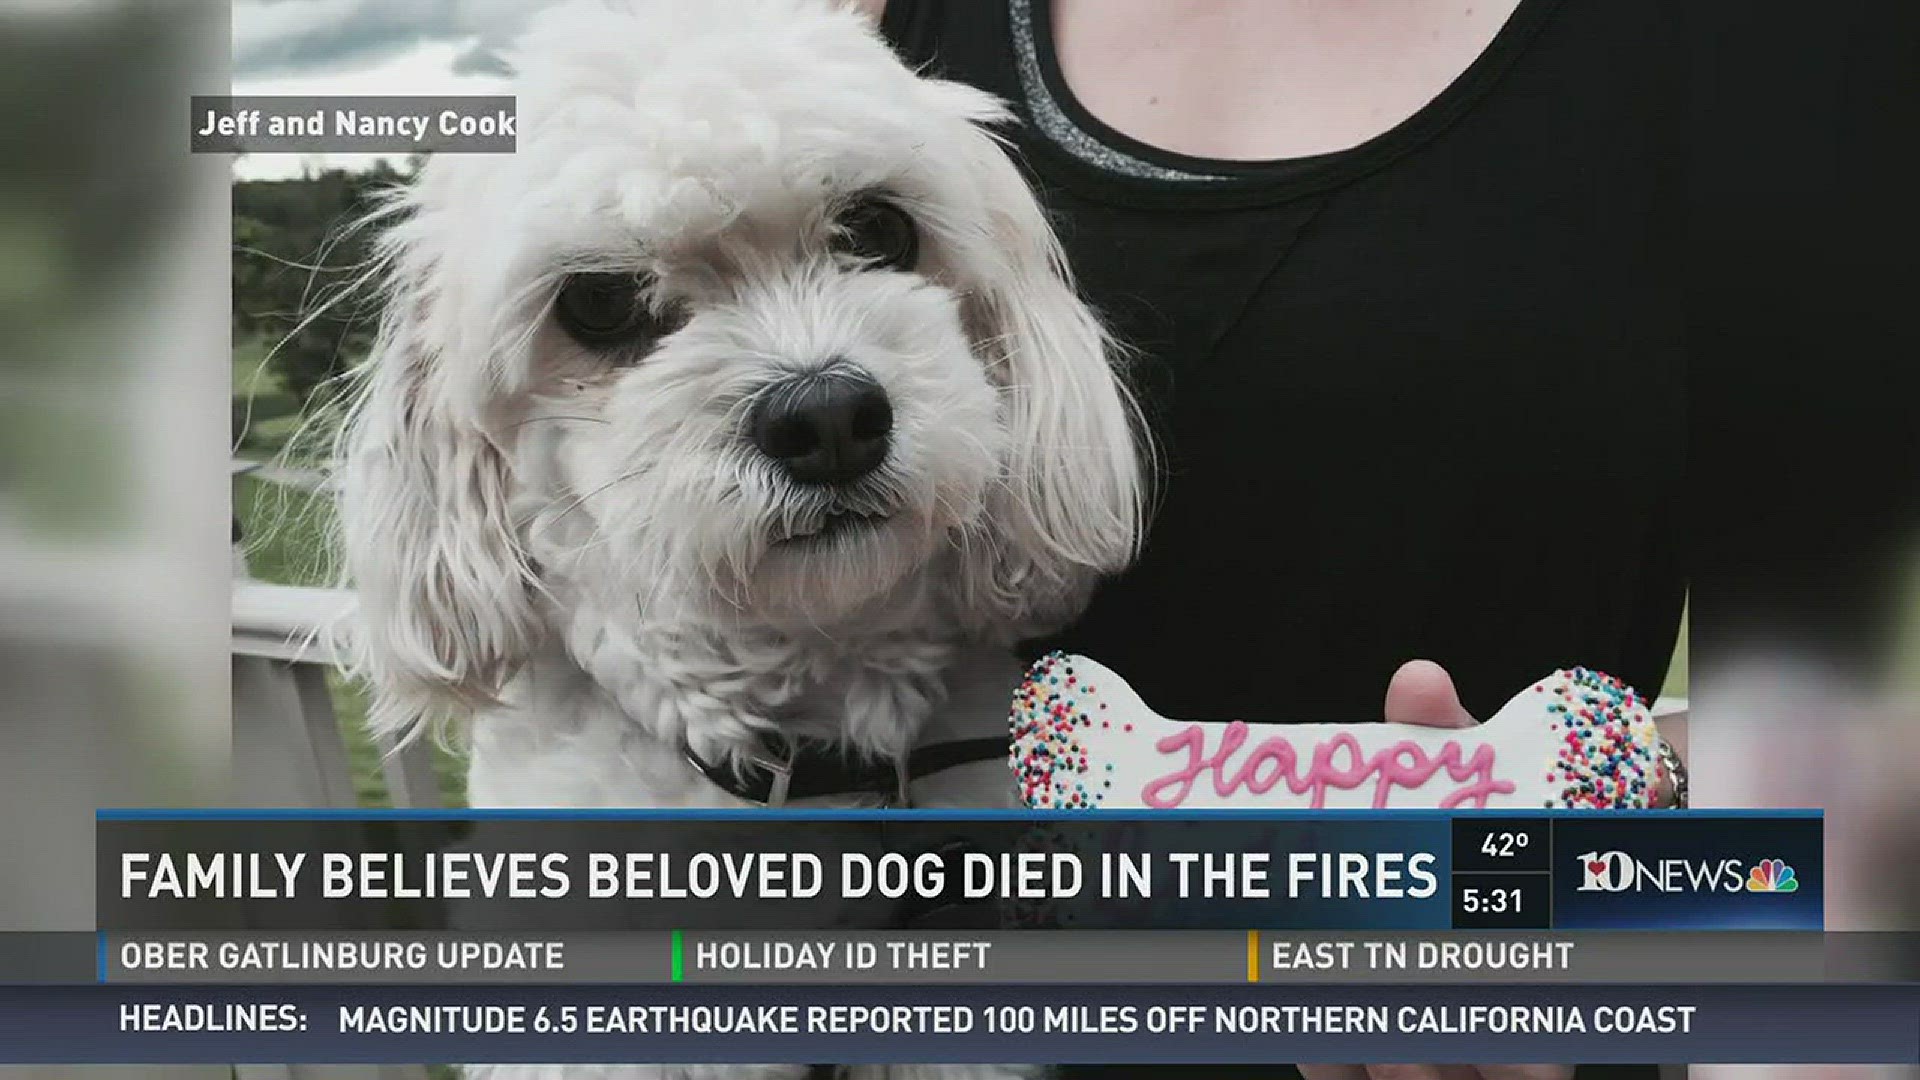 Dec. 8, 2016: A family visiting Sevier county from Ohio says they fear their beloved dog Chloe died in the fires.